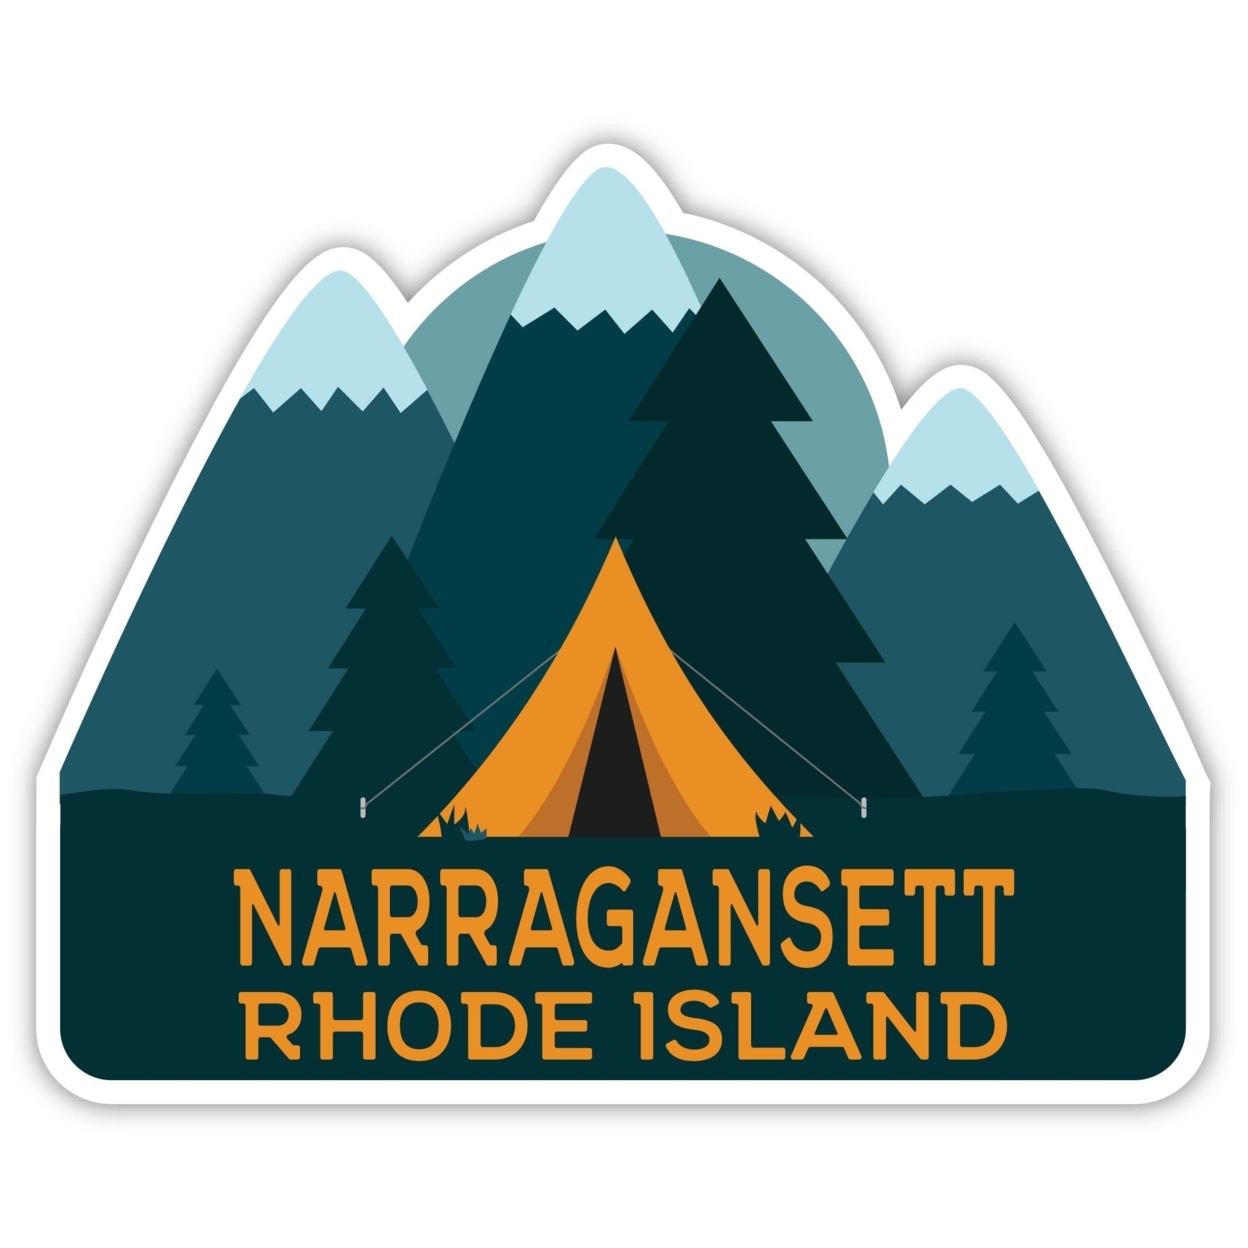 Narragansett Rhode Island Souvenir Decorative Stickers (Choose Theme And Size) - Single Unit, 2-Inch, Great Outdoors